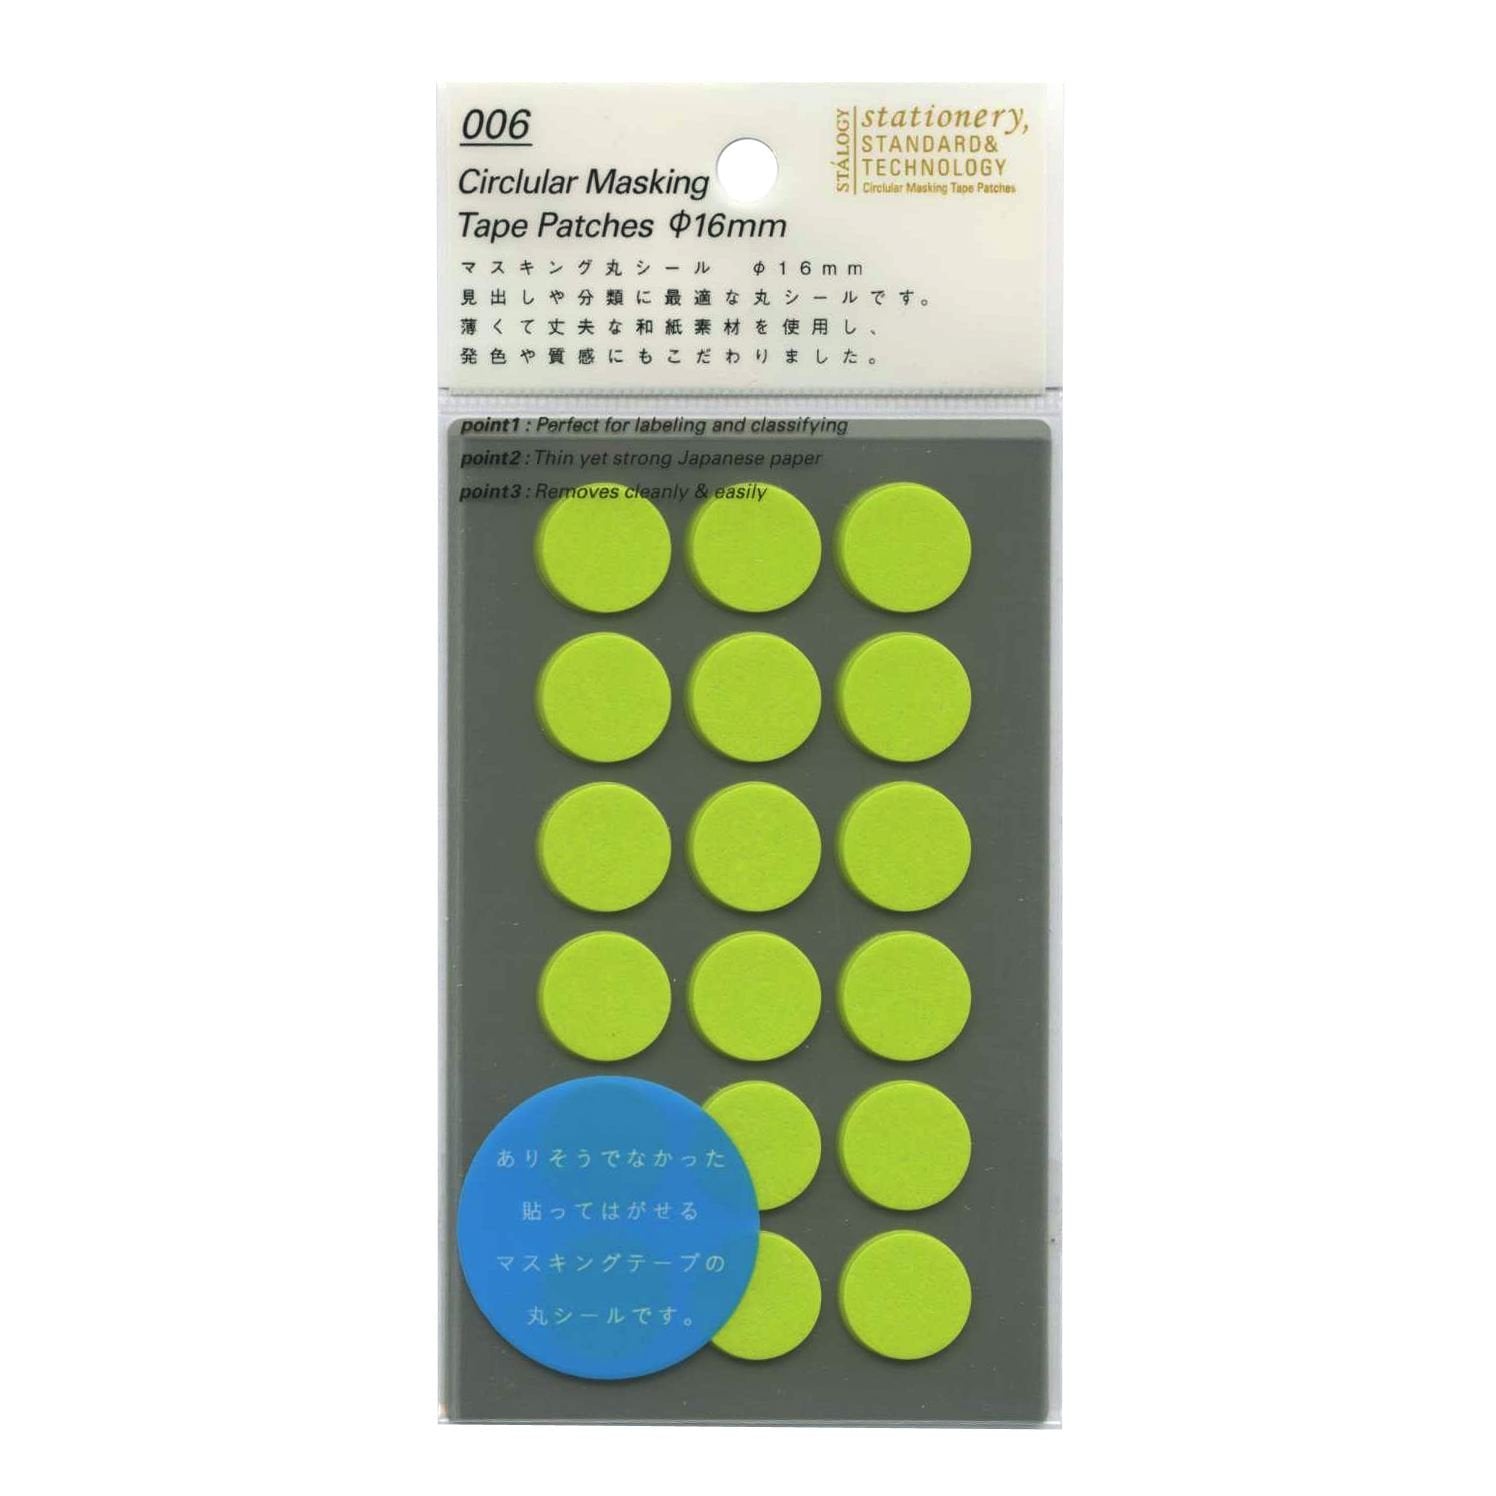 Turf Green Circular Masking Tape Patches. The circular masking patches are made from thin, yet strong Japanese paper, perfect for labelling and classifying. Durable Writeable.